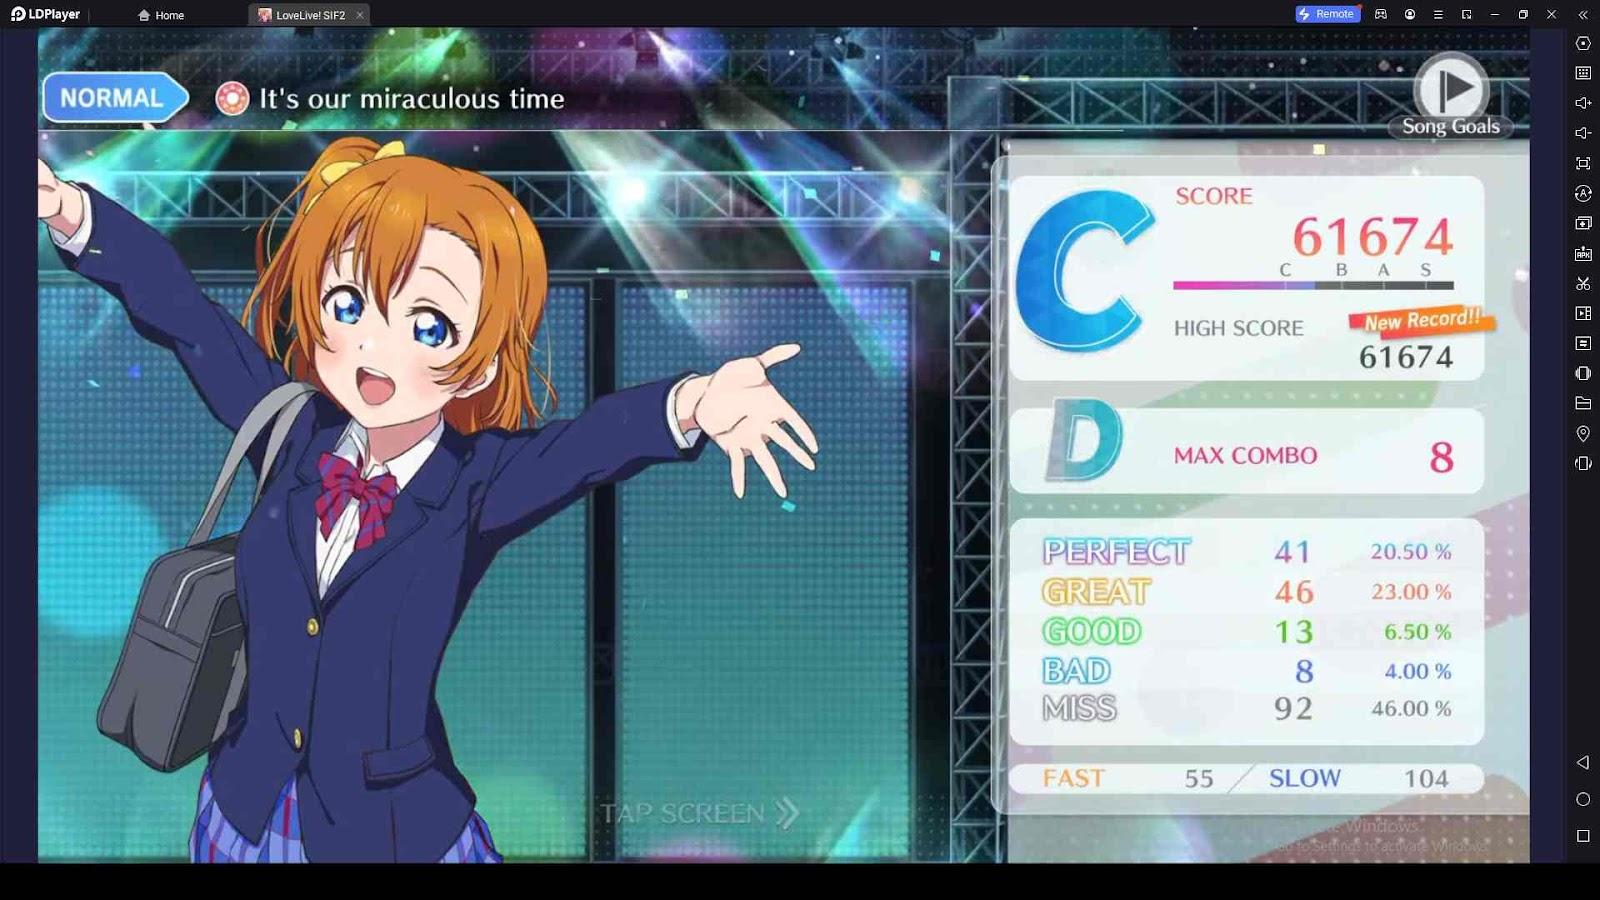 How to Score More in Love Live! SIF2 Live Shows